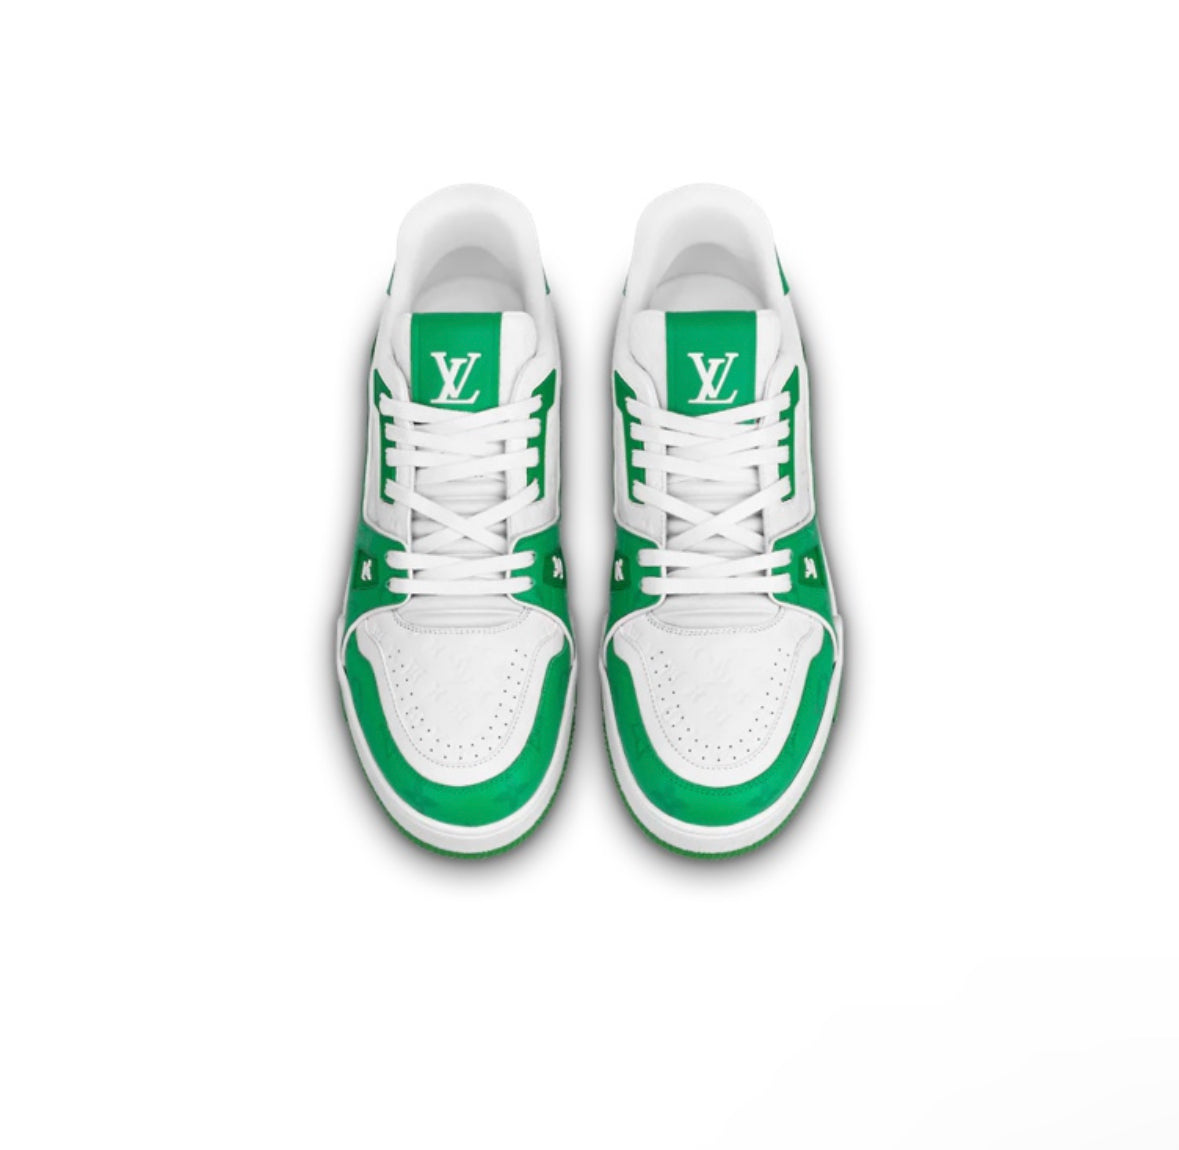 Louis Vuitton LV Trainers “Green”